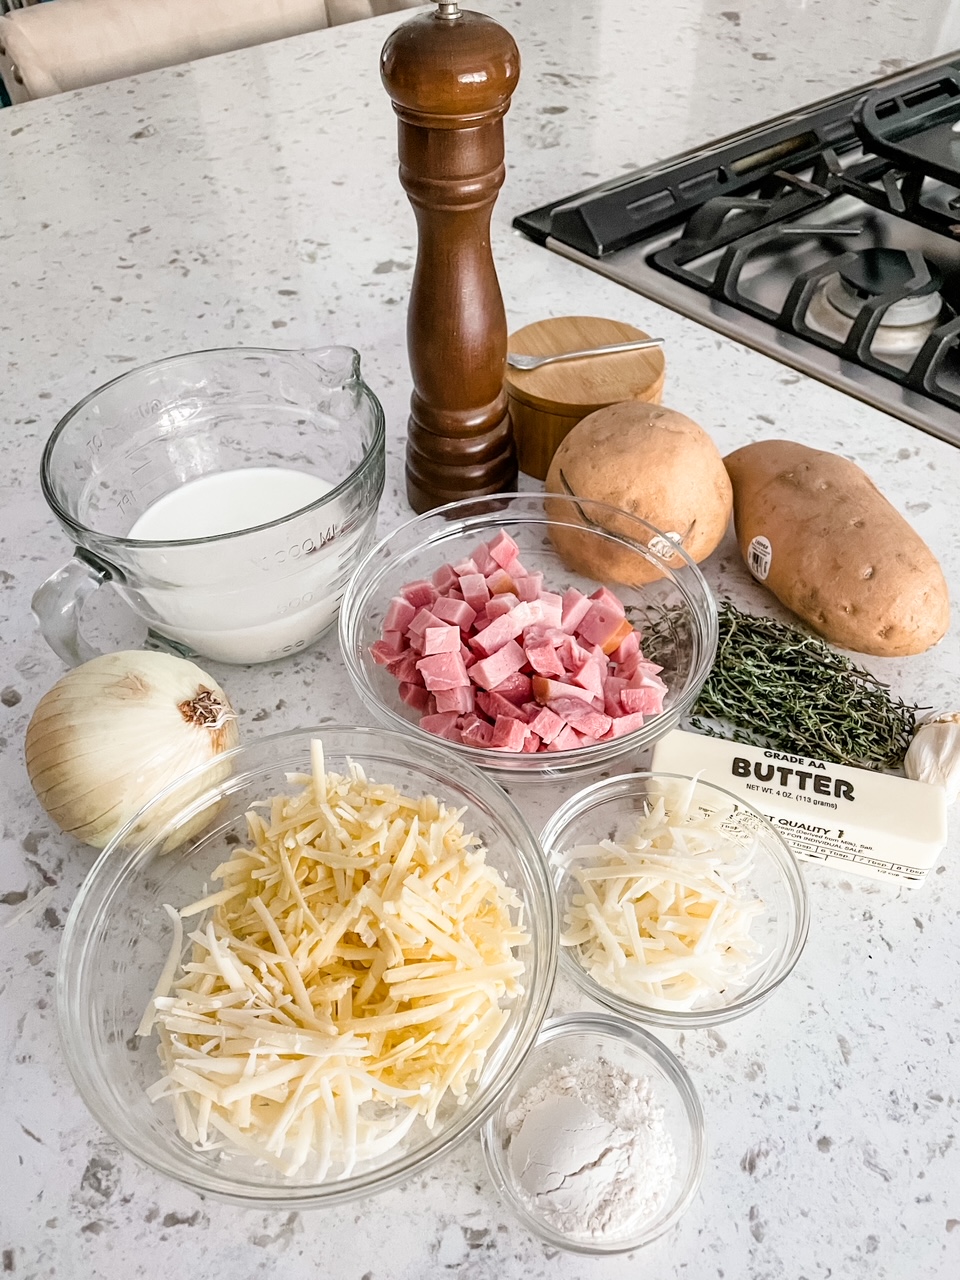 The ingredients laid out on a countertop - onion, salt, pepper, cheese, ham, potatoes, and thyme